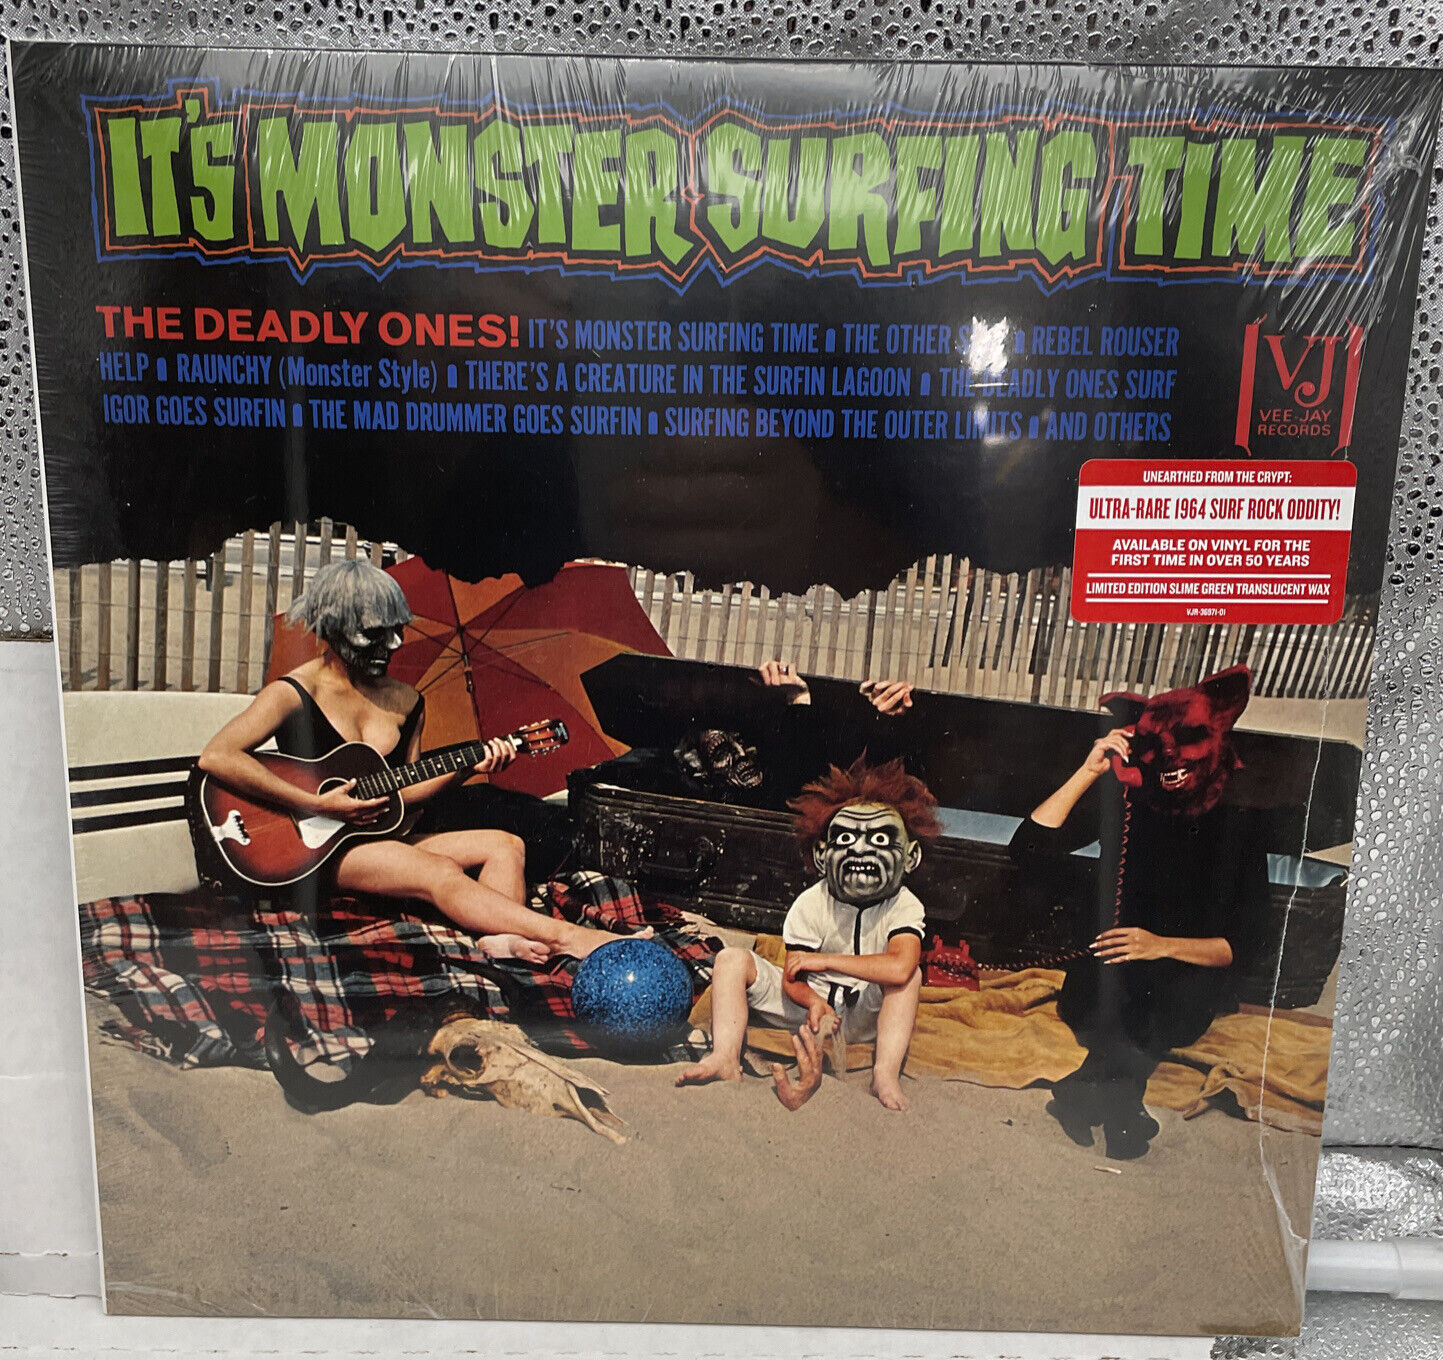 It’s Monster Surfing Time Vinyl New Factory Sealed 1964 Surf Rock Oddity  Green